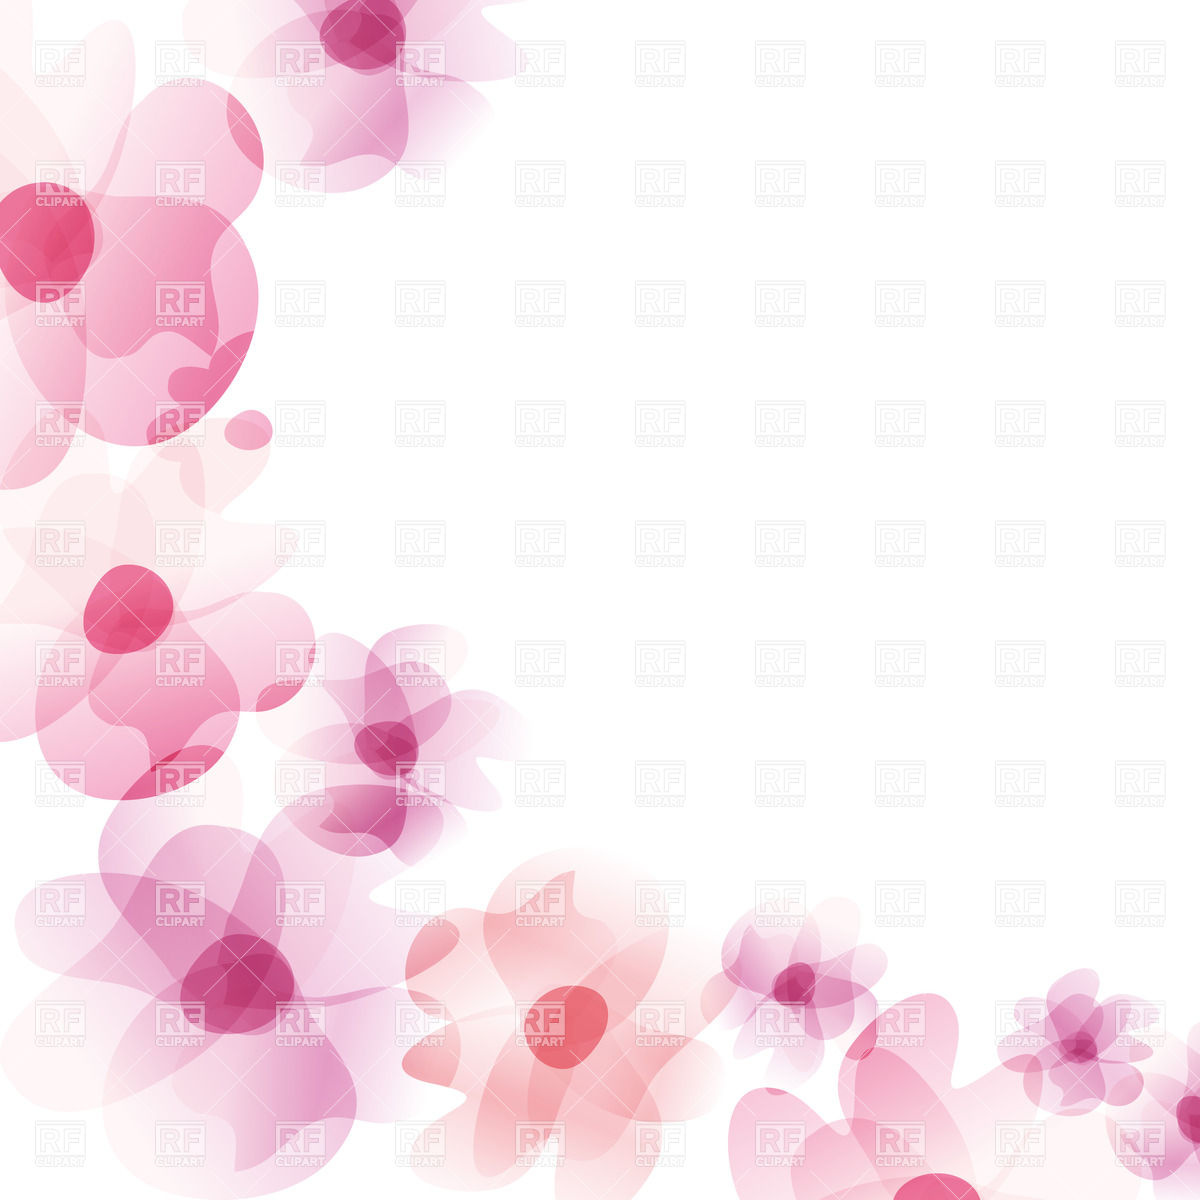 Transparent Pink Flowers Download Royalty Free Vector Clipart  Eps